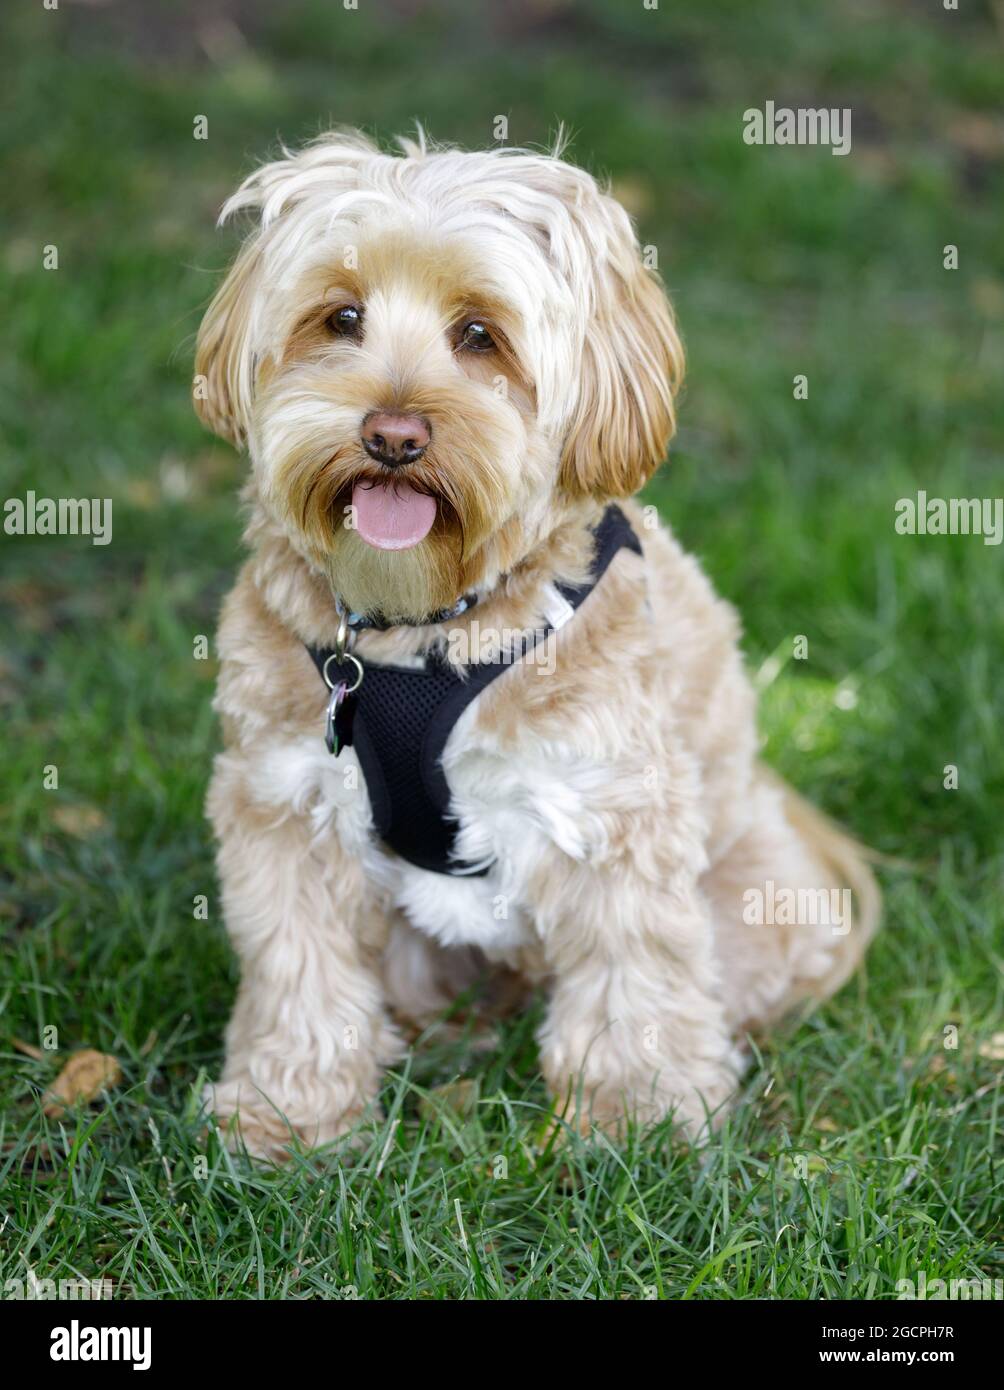 2-Years-Old Male Daisy Dog. There are three dog breeds that make up the Daisy Dog – the Bichon Frise, Poodle, and the Shih-tzu. Stock Photo